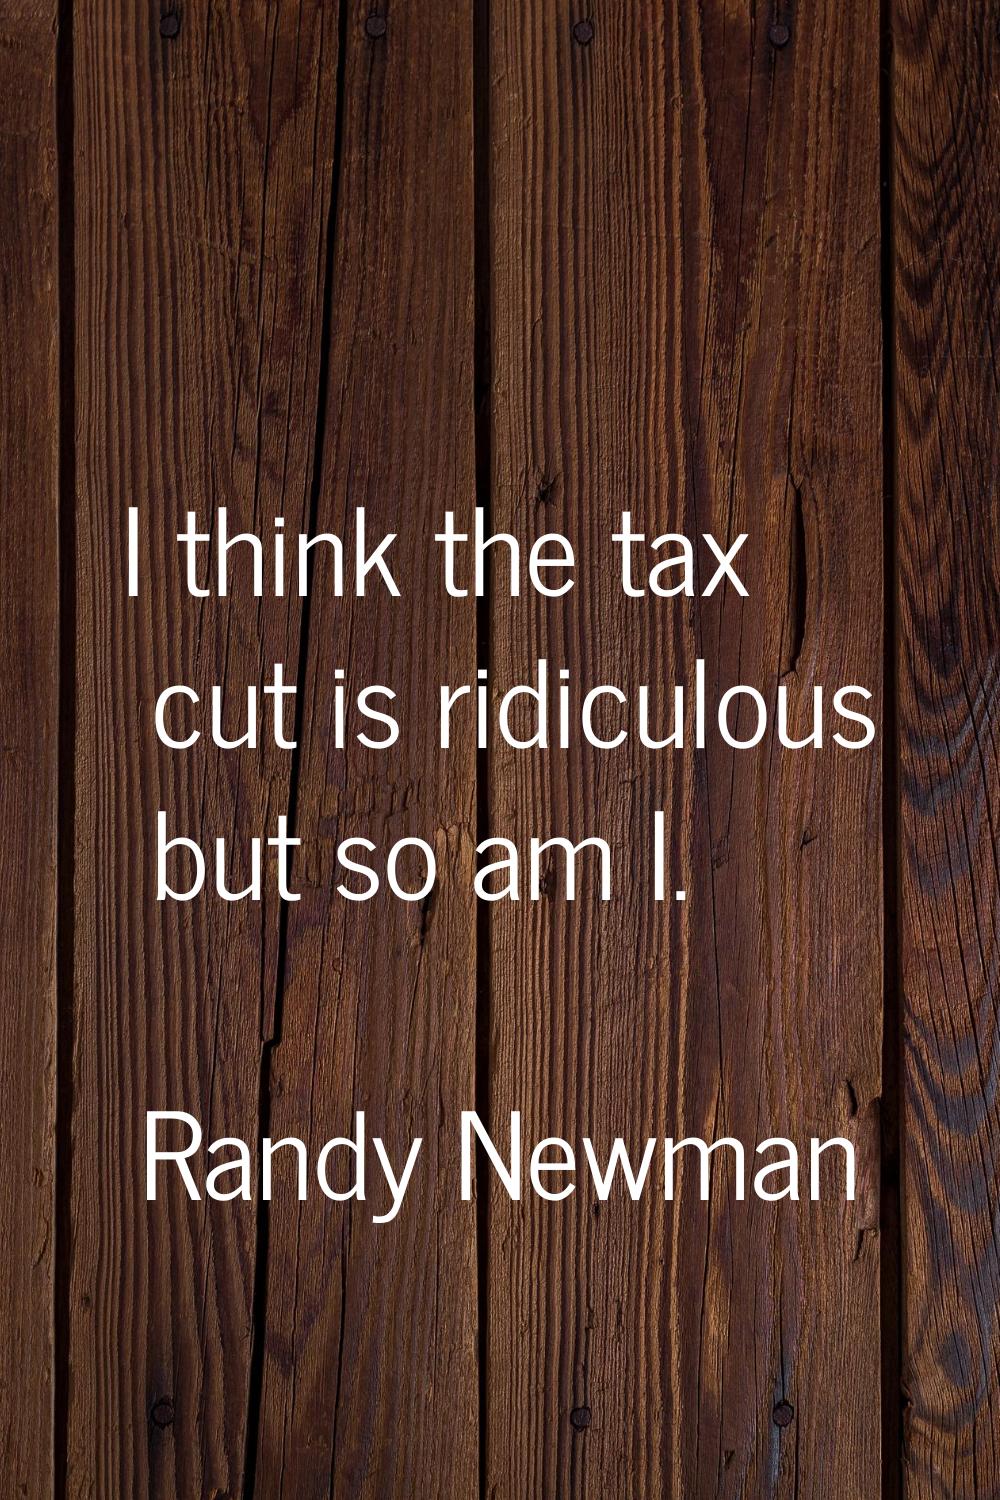 I think the tax cut is ridiculous but so am I.